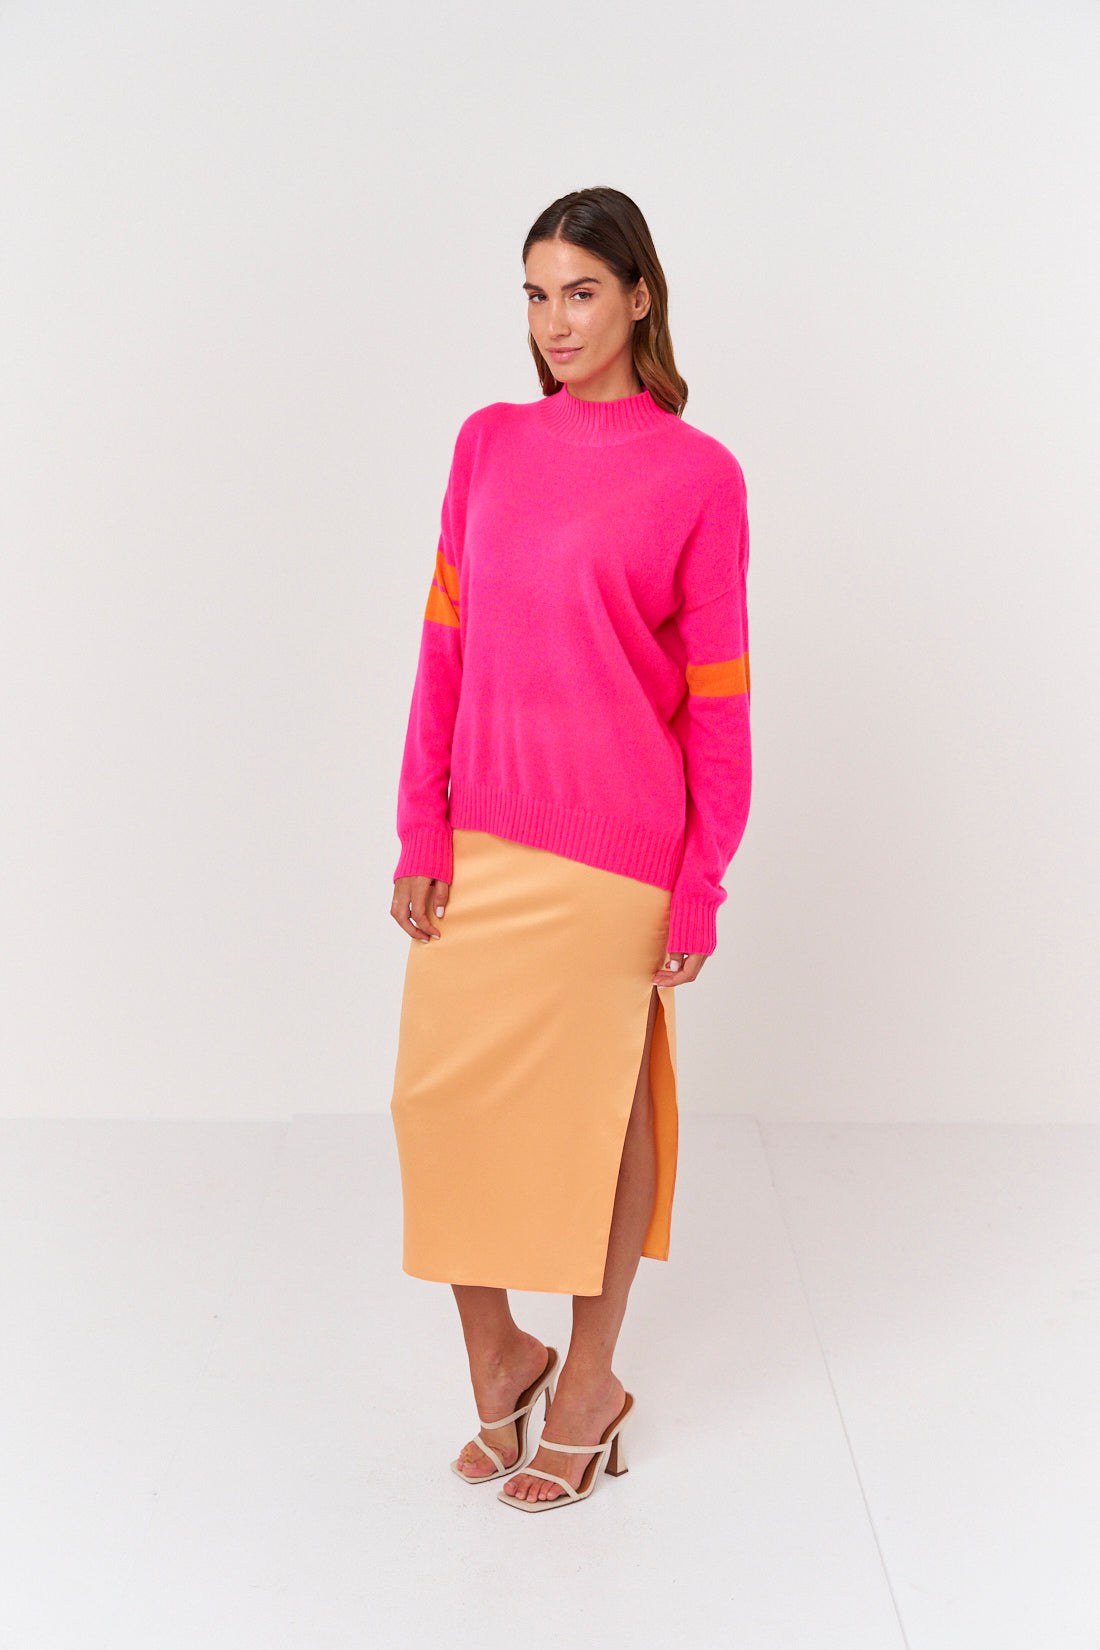 Embroidered Eye Sweater Super Neon Pink, Sweater by Brodie Cashmere | LIT Boutique